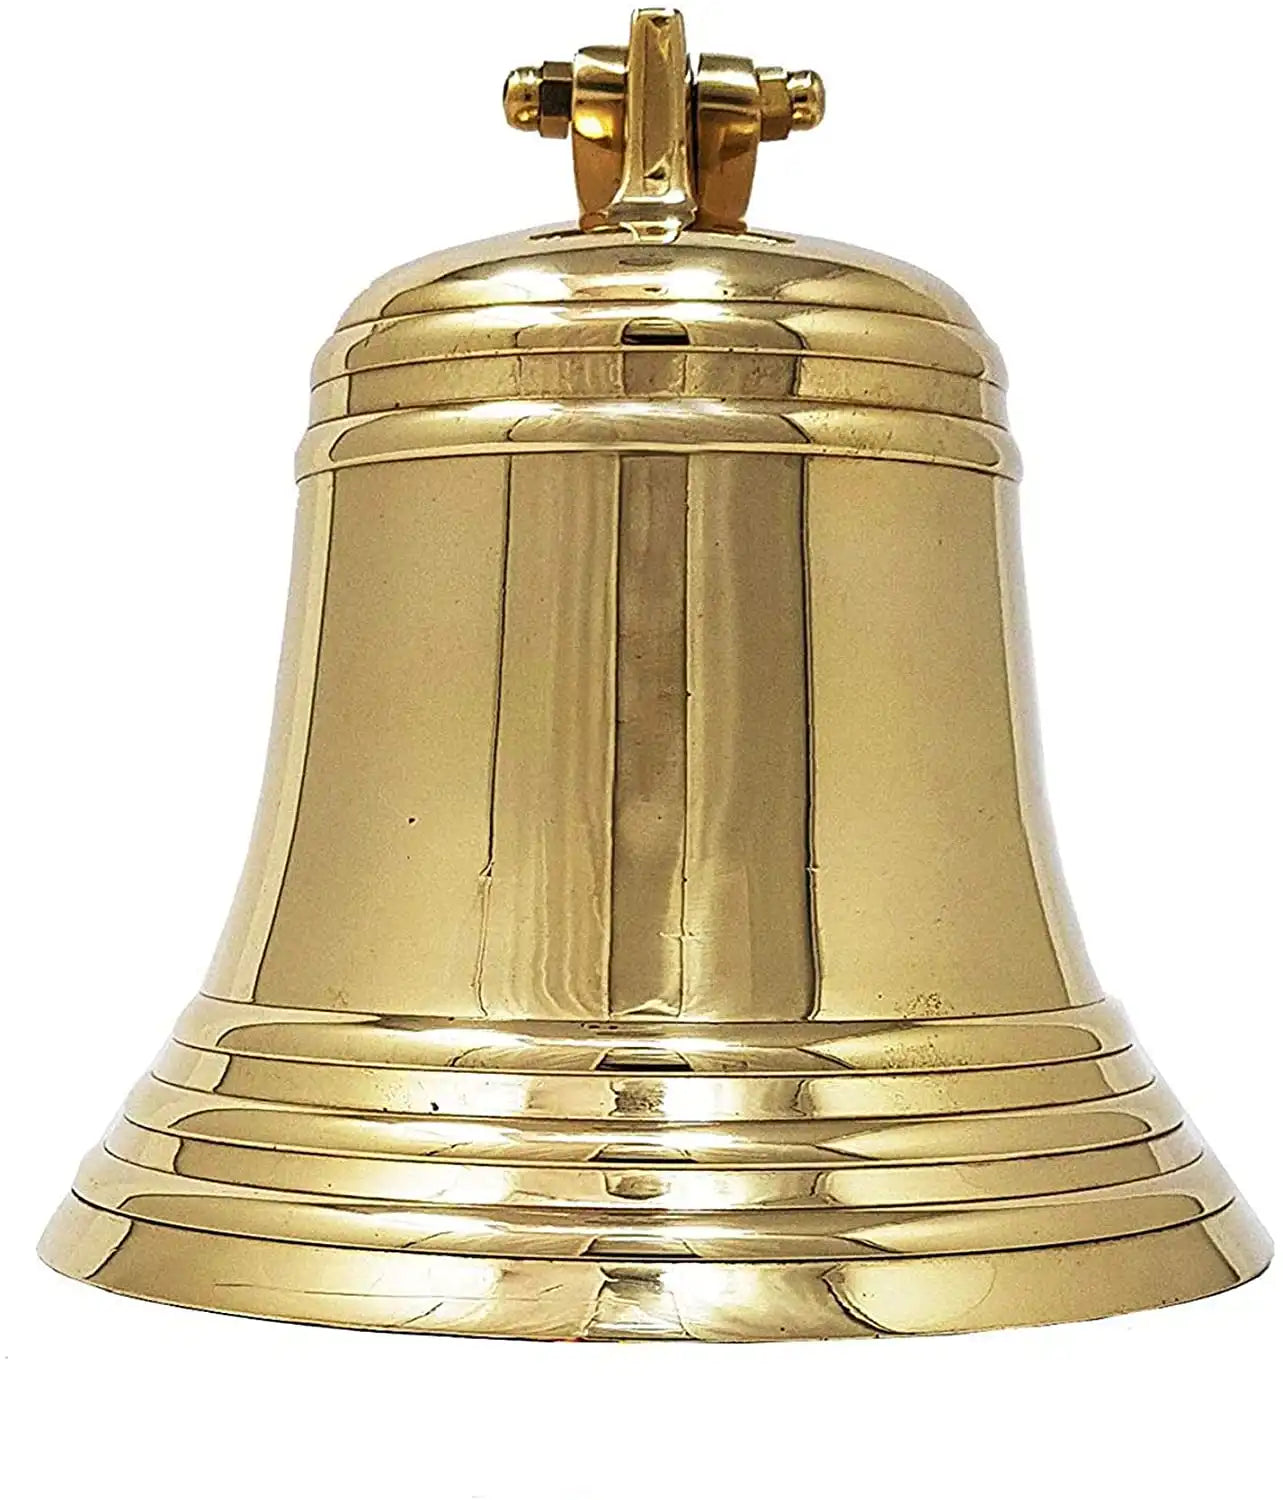 11" Solid Brass Ship Bell - Features Sturdy Bracket Door Bell - Wall Mountable Jumbo Bell for Home - Coastal Beach Home Decorations - Perfect...